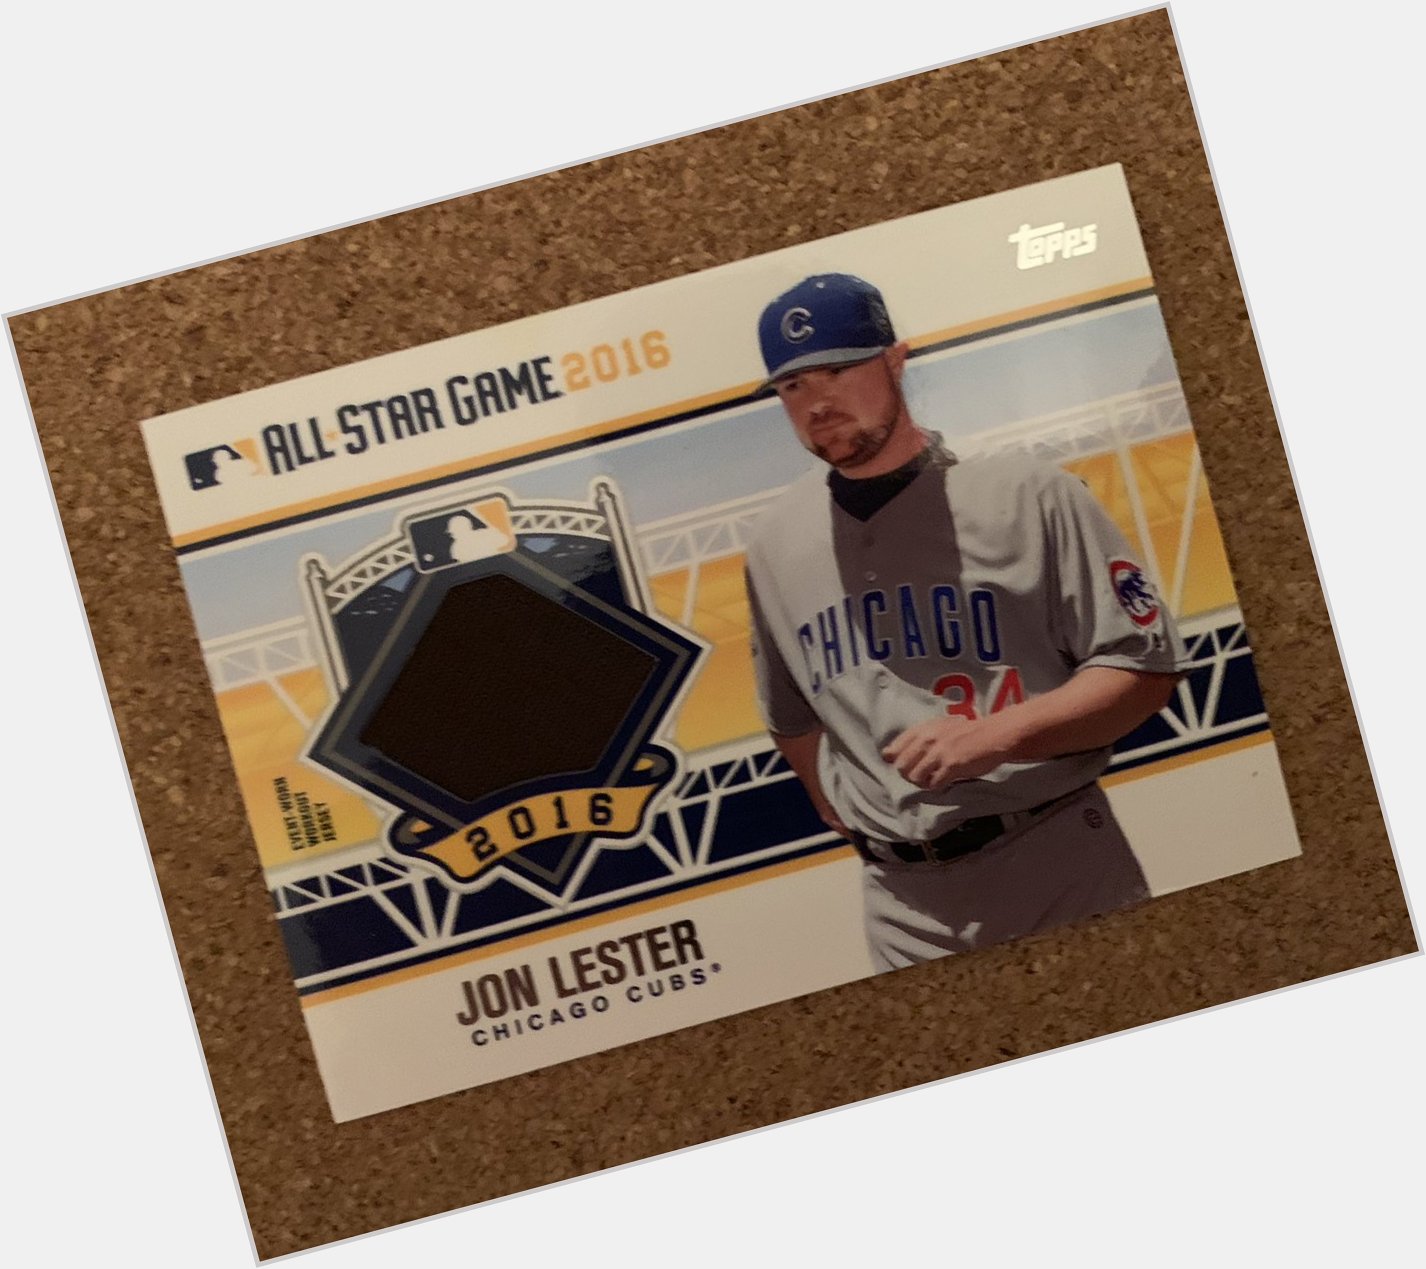   2016 Topps Jon Lester All-Star Game jersey card  

Happy 35th birthday,  